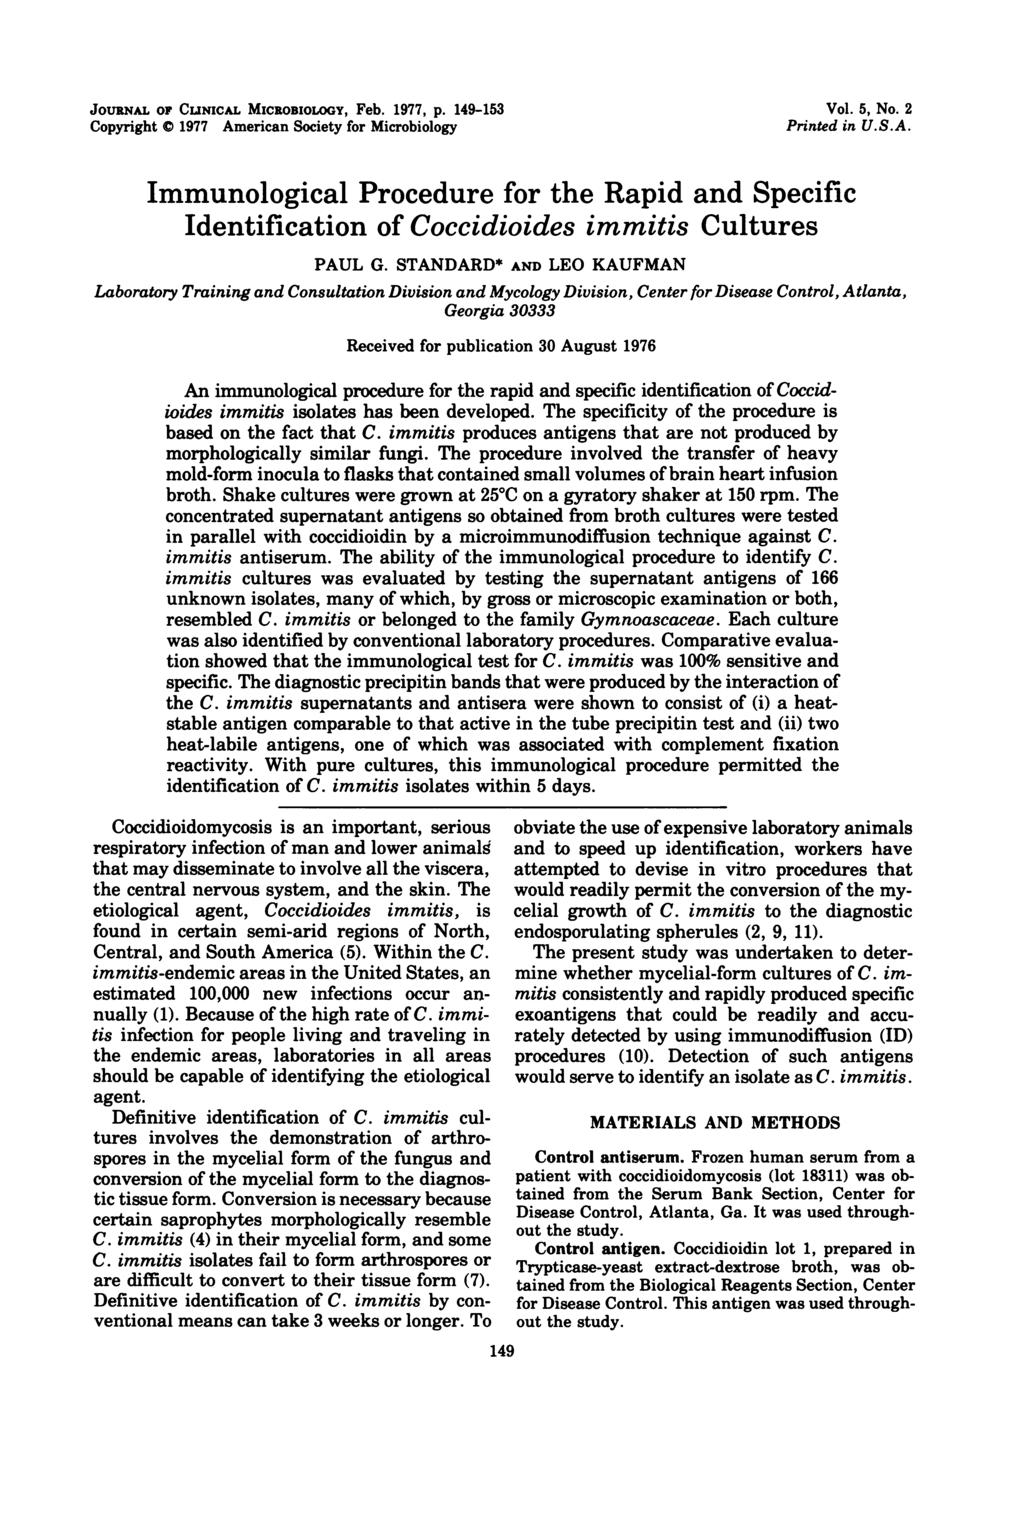 JOURNAL OF CUNICAL MICROBIOLOGY, Feb. 1977, p. 149-153 Copyright 0 1977 American Society for Microbiology Vol. 5, No. 2 Printed in U.S.A. Immunological Procedure for the Rapid and Specific Identification of Coccidioides immitis Cultures PAUL G.